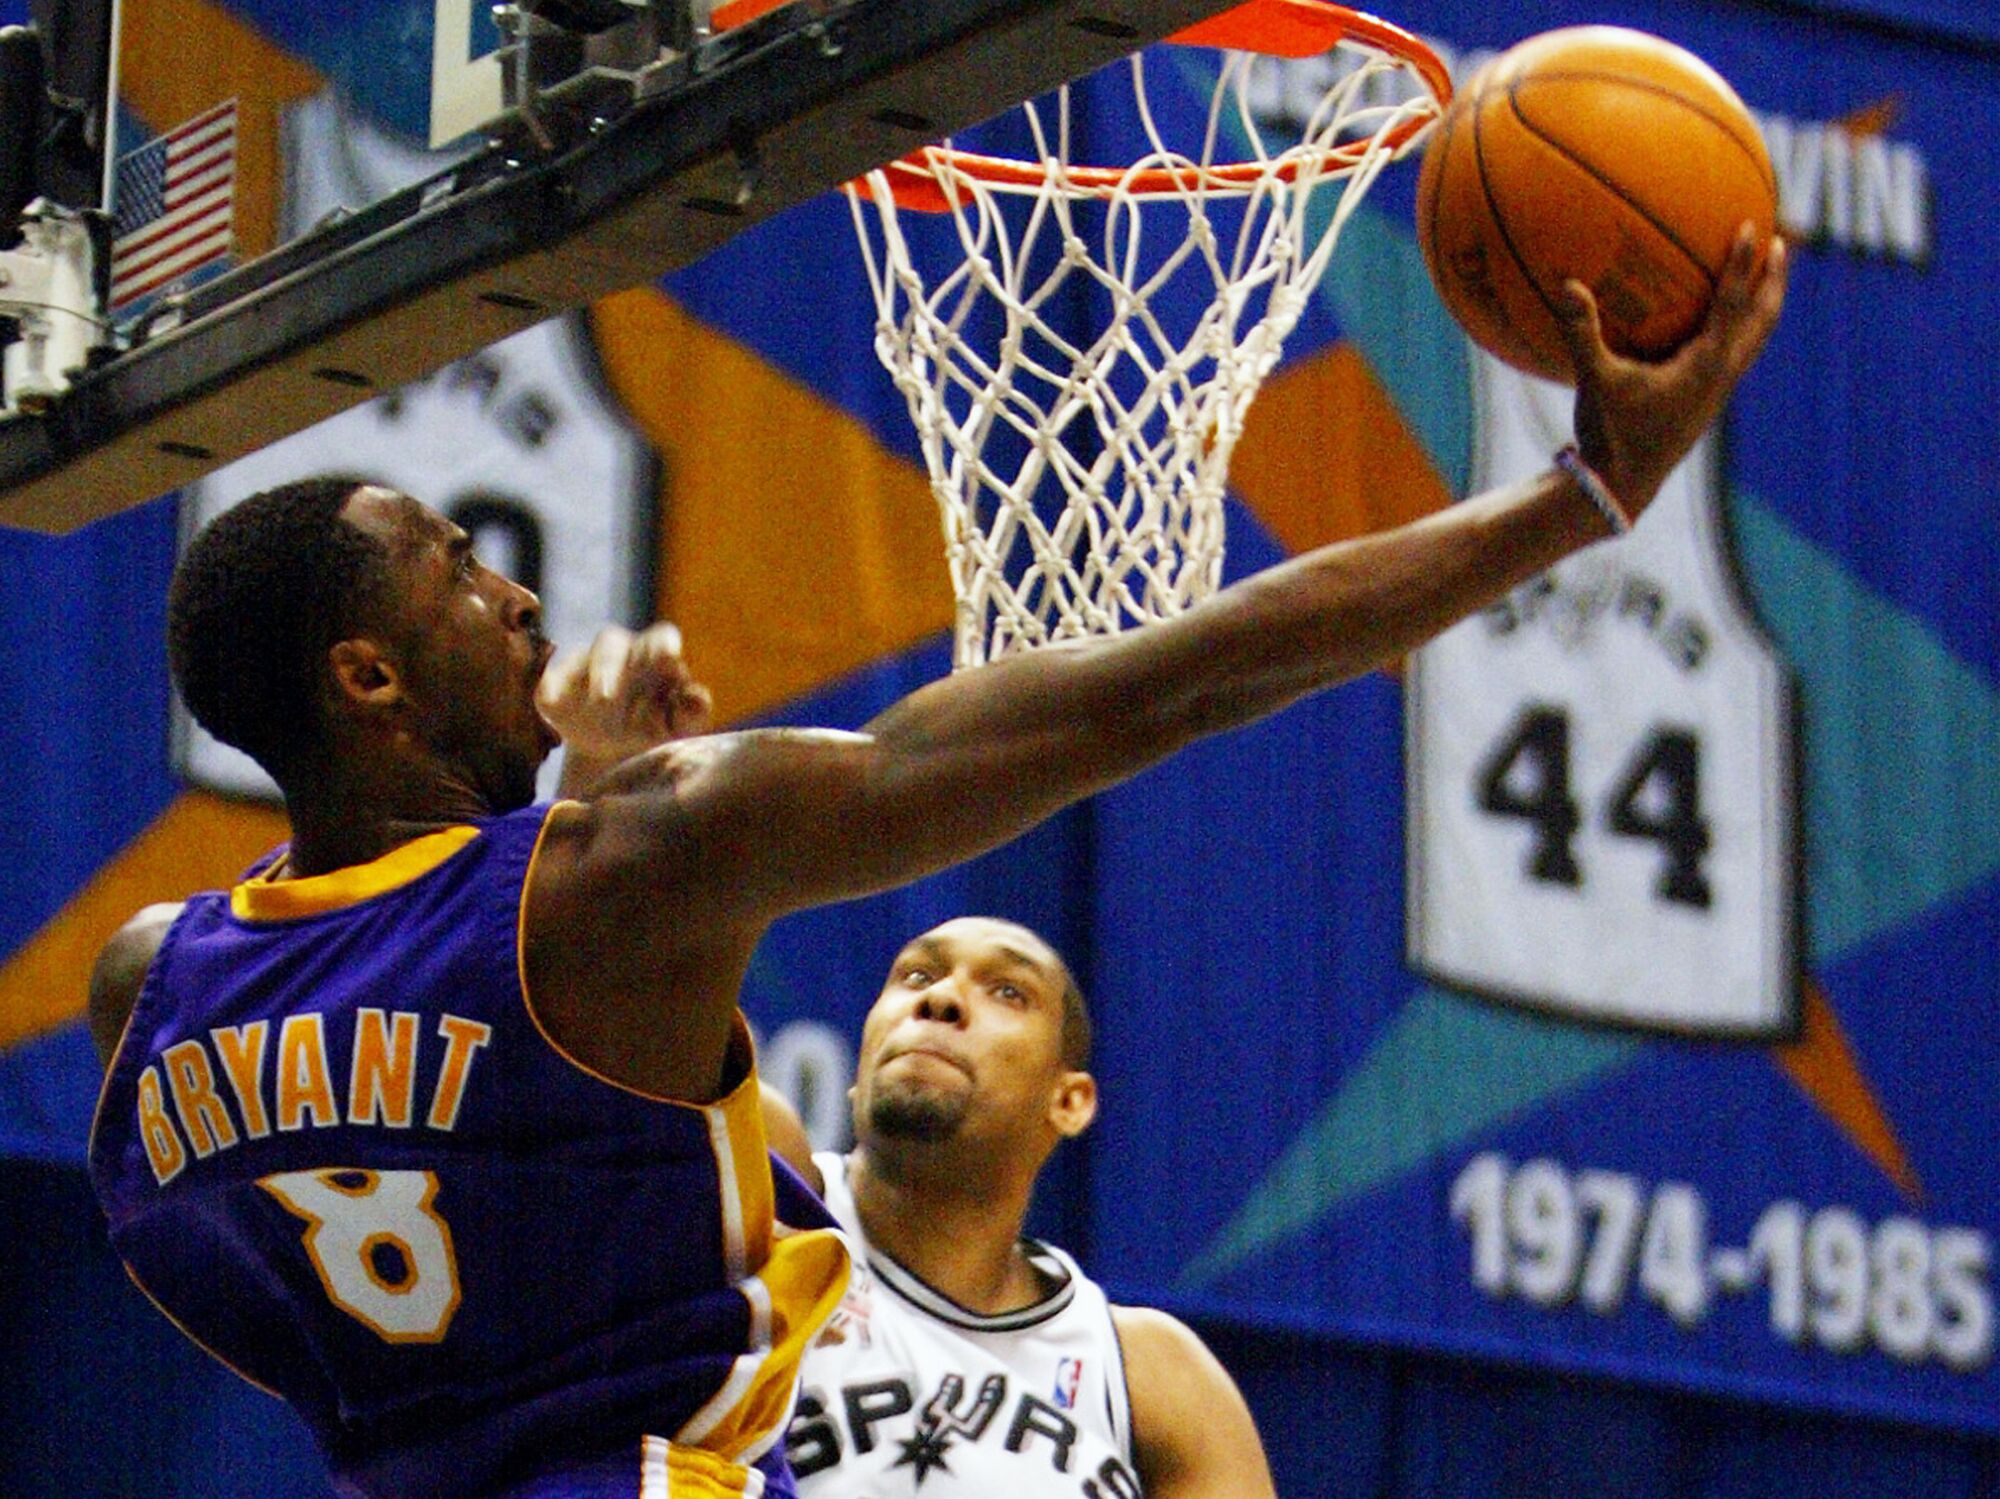 Kobe Bryant attempts a reverse layup against Spurs forward Tim Duncan during the 2002 playoffs.